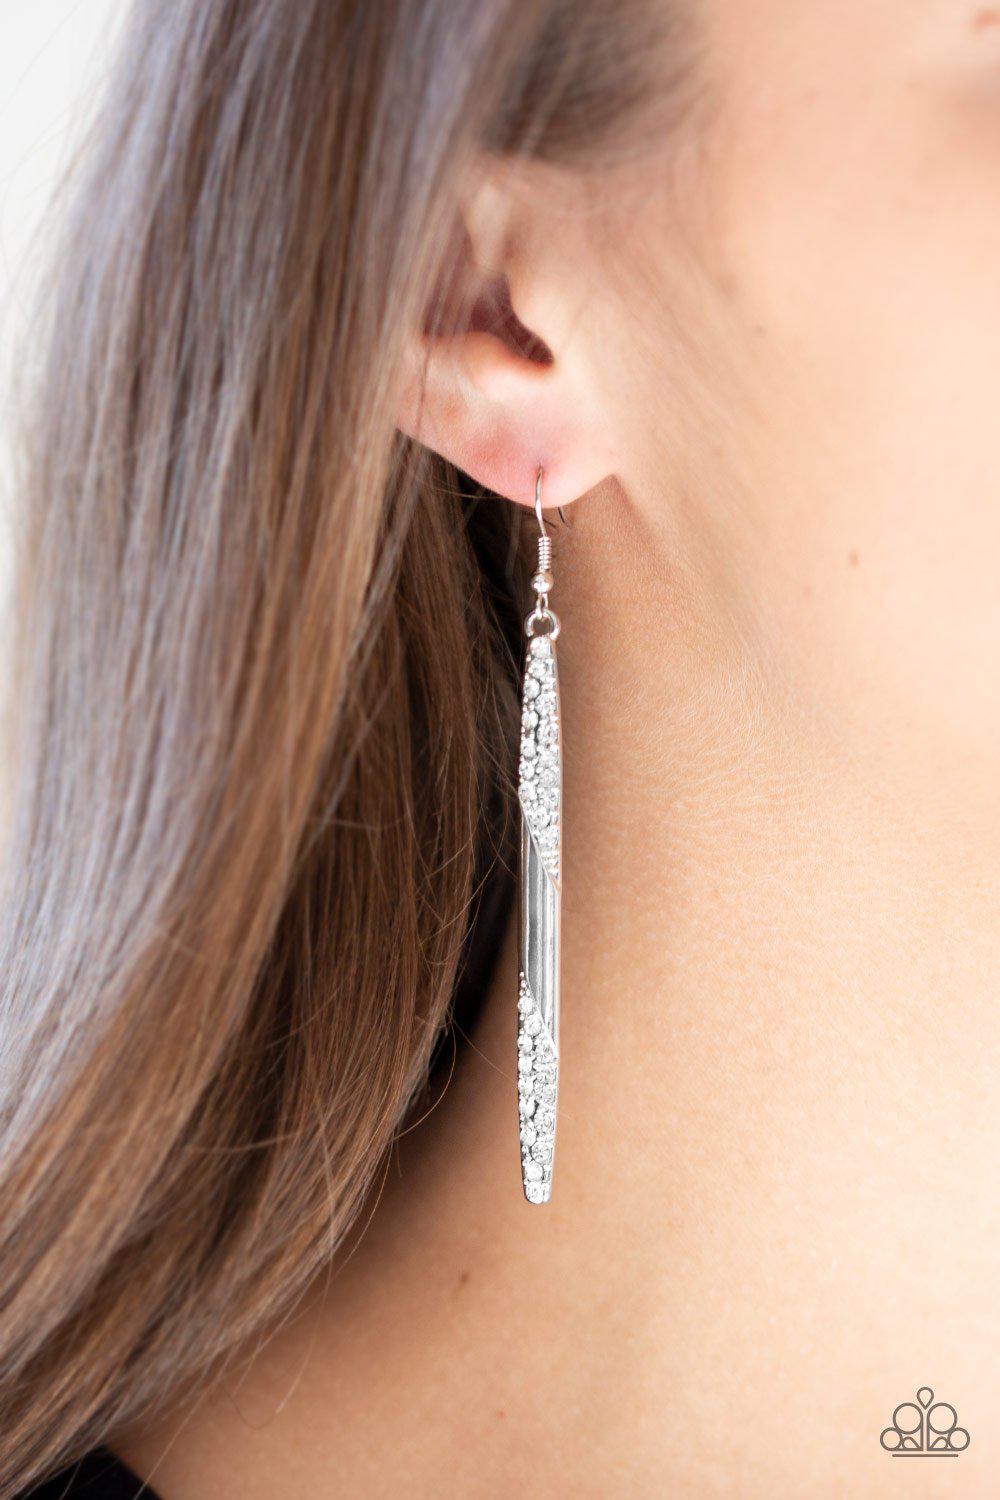 Award Show Attitude Silver and White Earrings - Paparazzi Accessories-CarasShop.com - $5 Jewelry by Cara Jewels